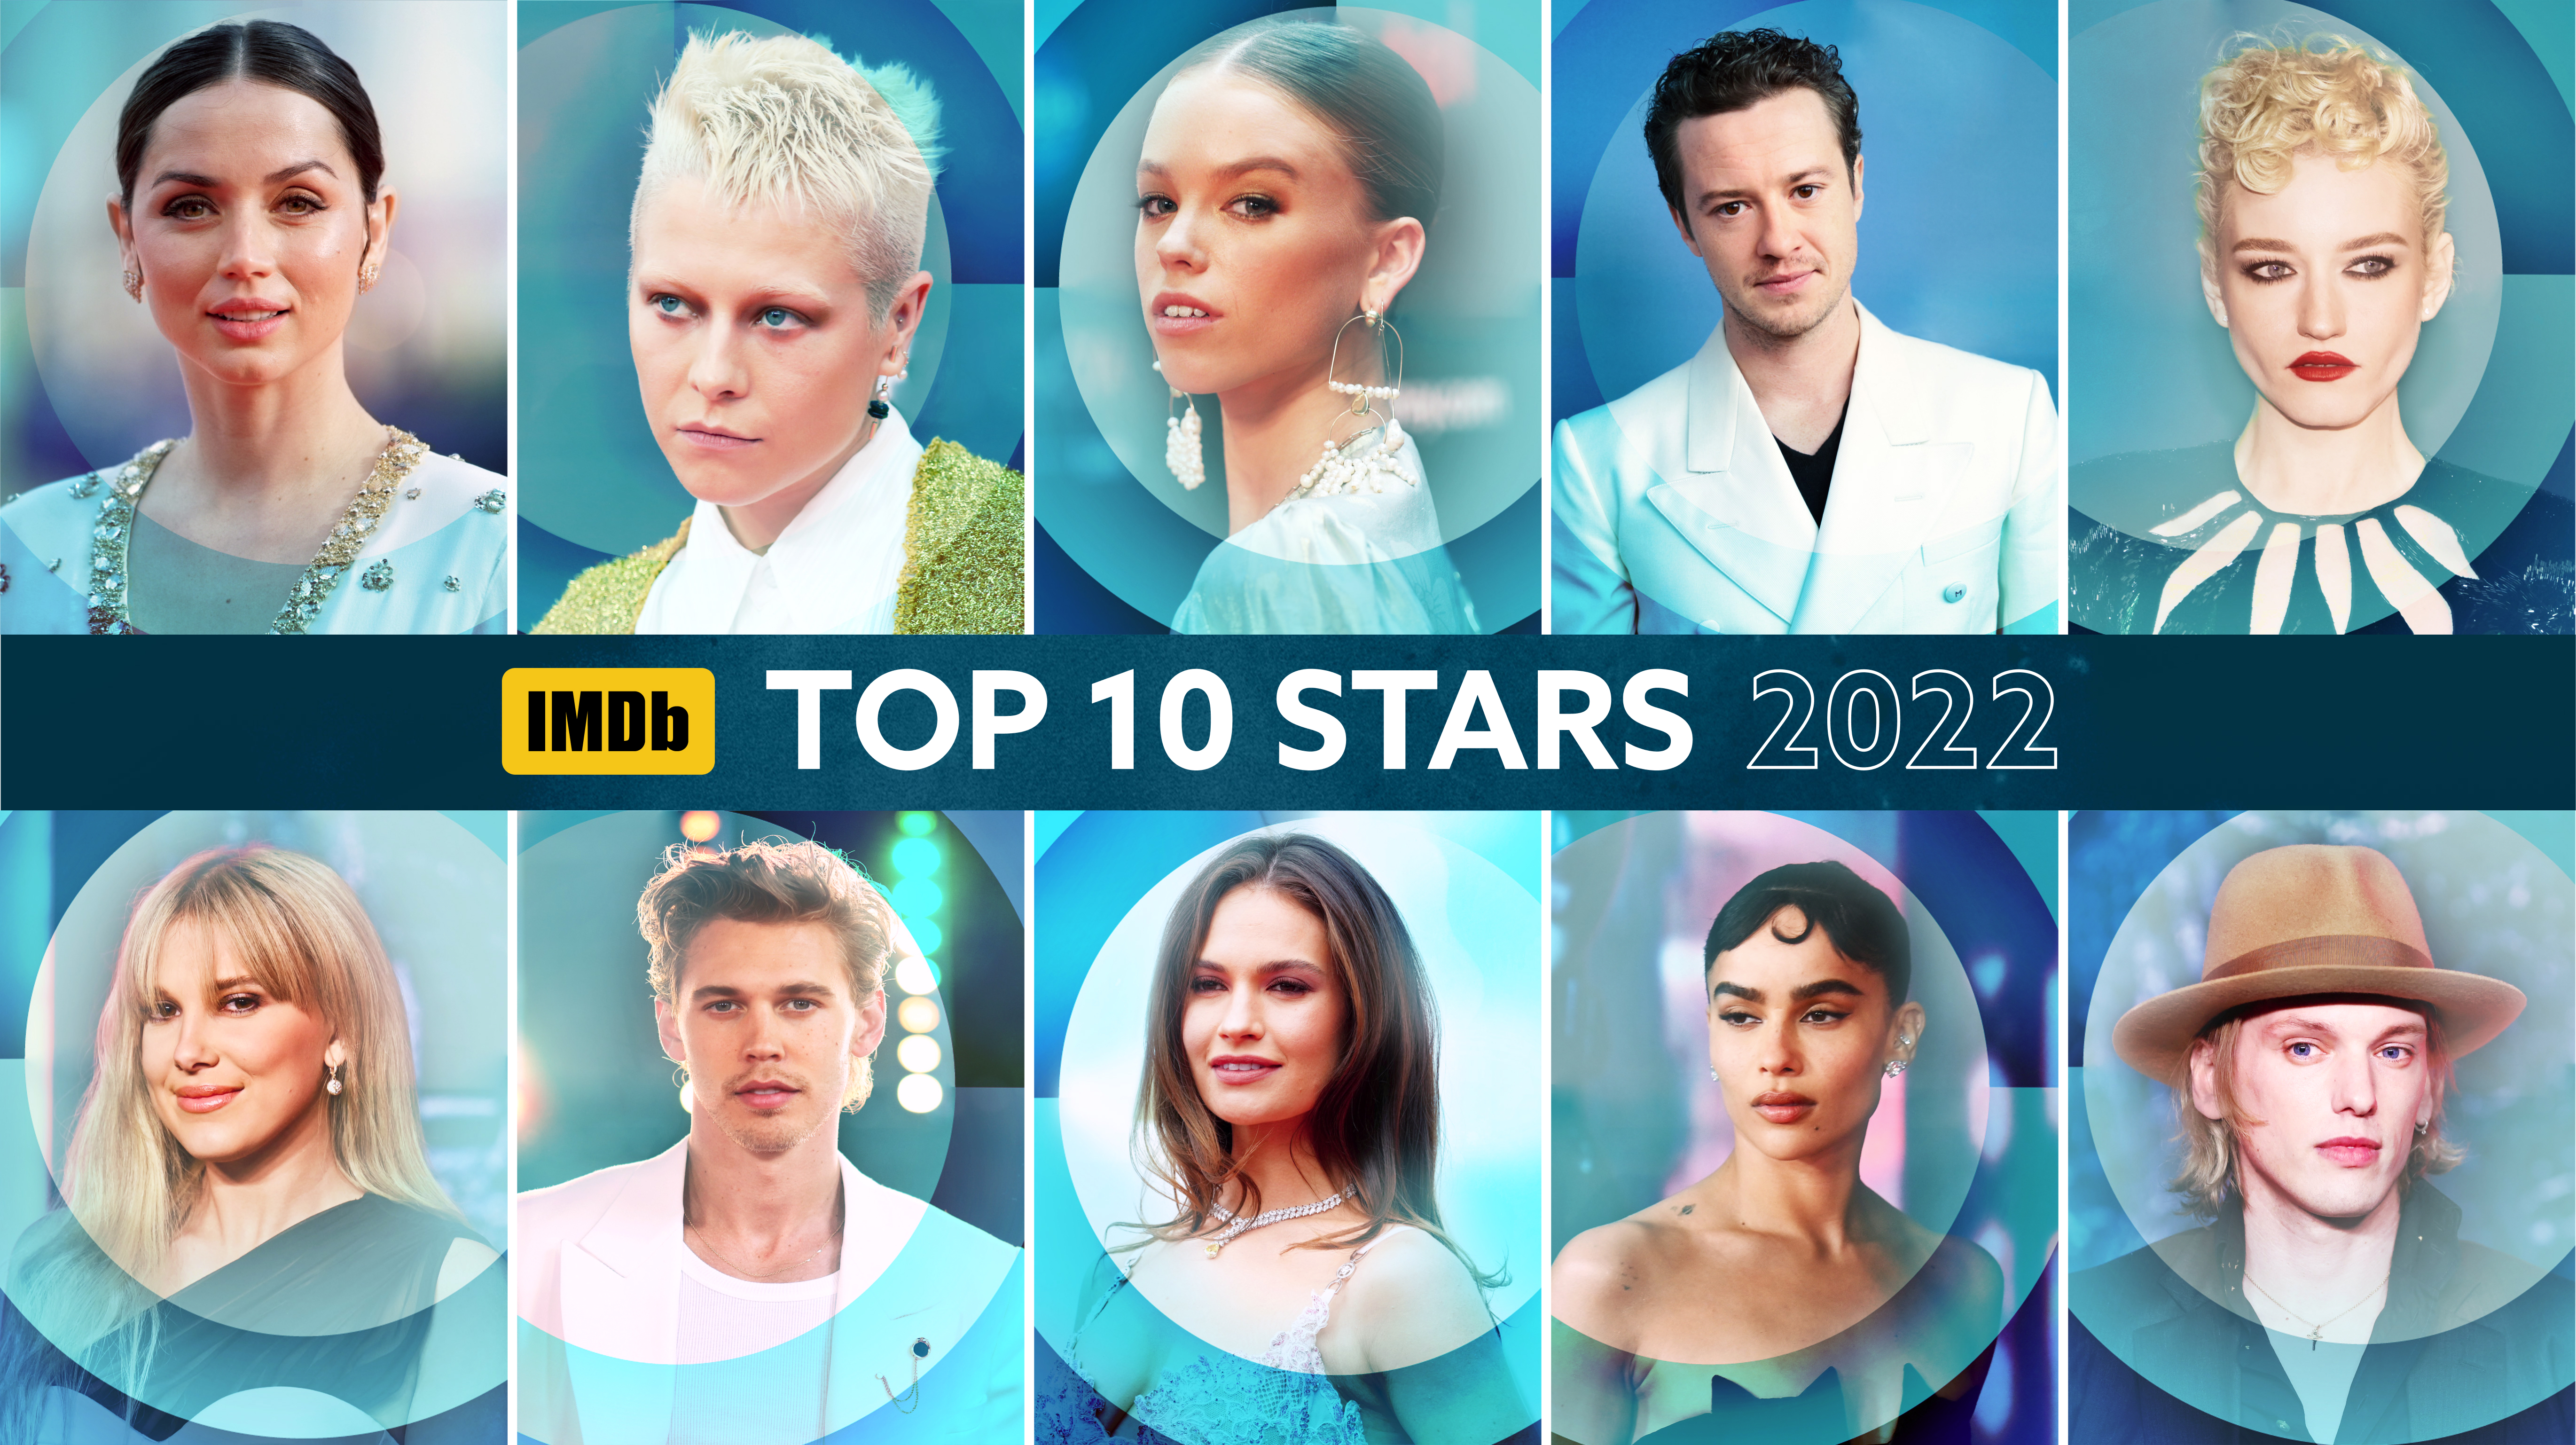 IMDb Announces Top 10 Movies and TV Shows of 2021